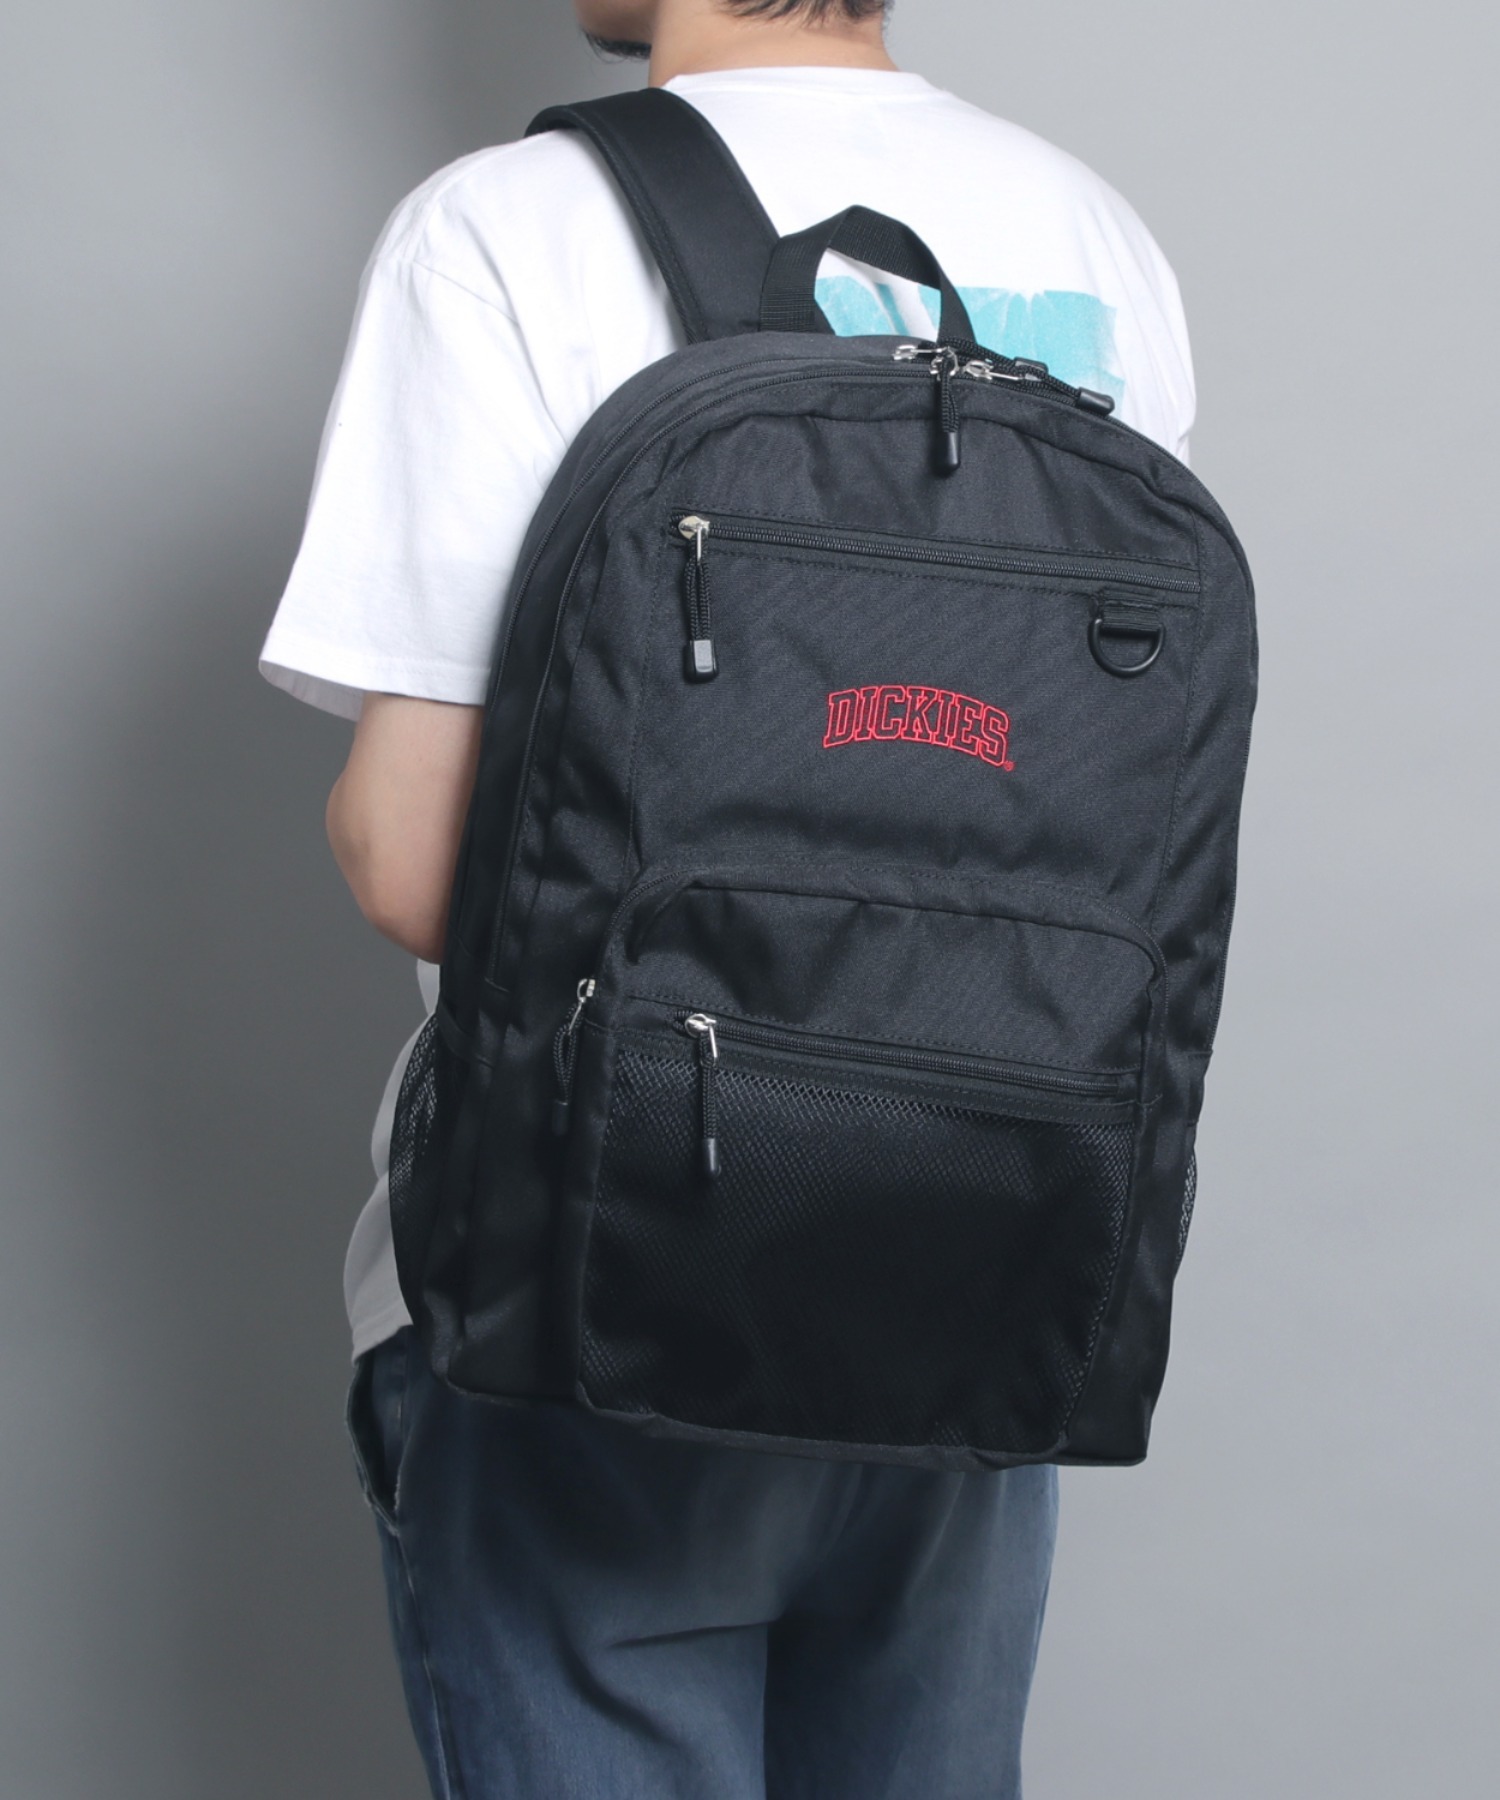 【DICKIES/ディッキーズ】ARCH LOGO BACKPACK /アーチロゴバックパック